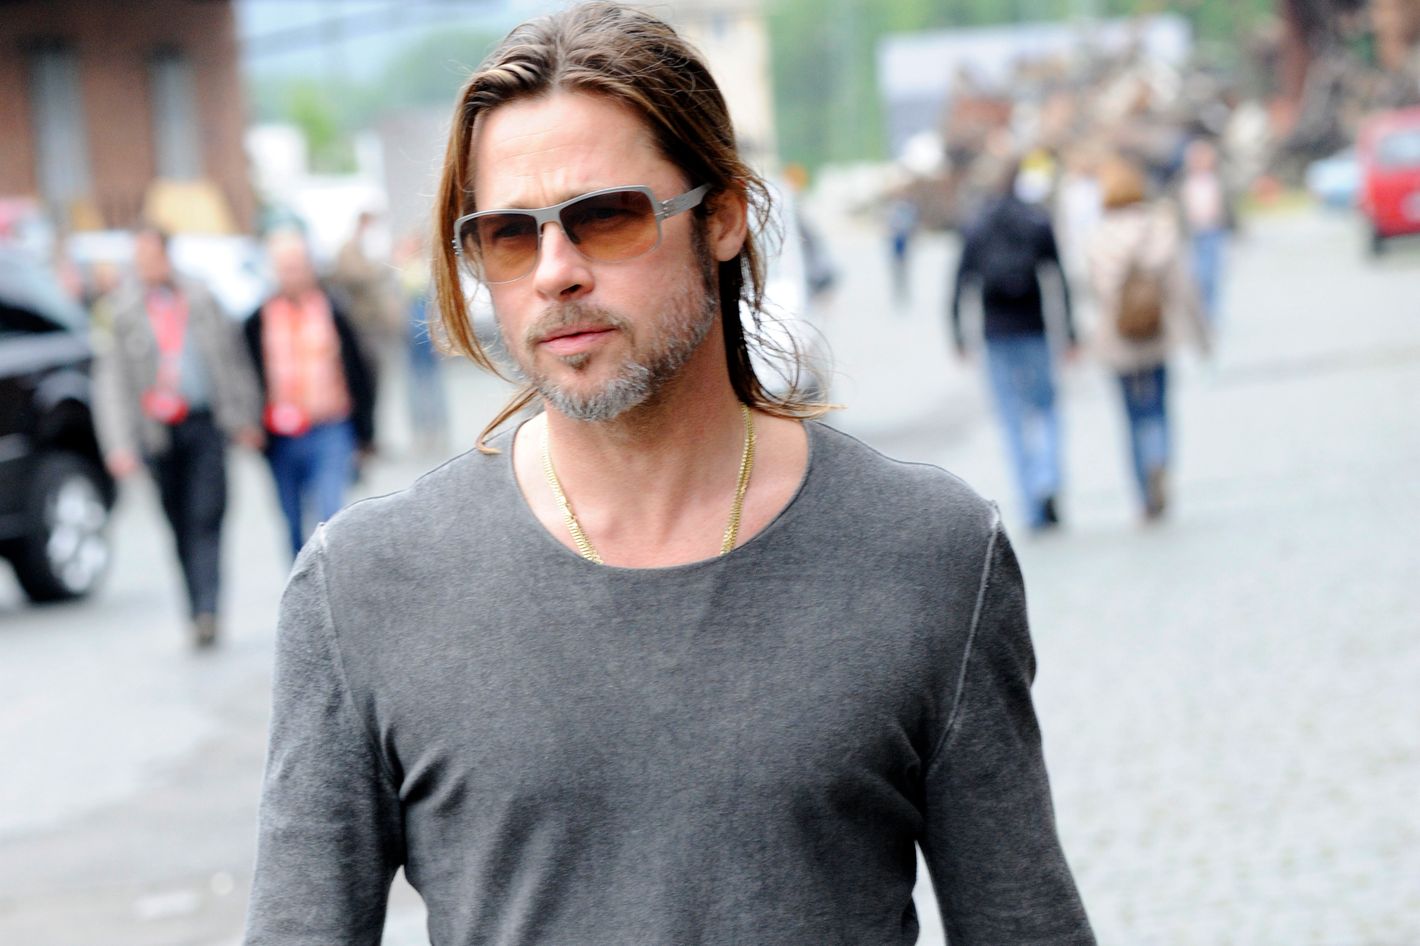 Chanel Paid Brad Pitt a Reported $7 Million for His 'Services